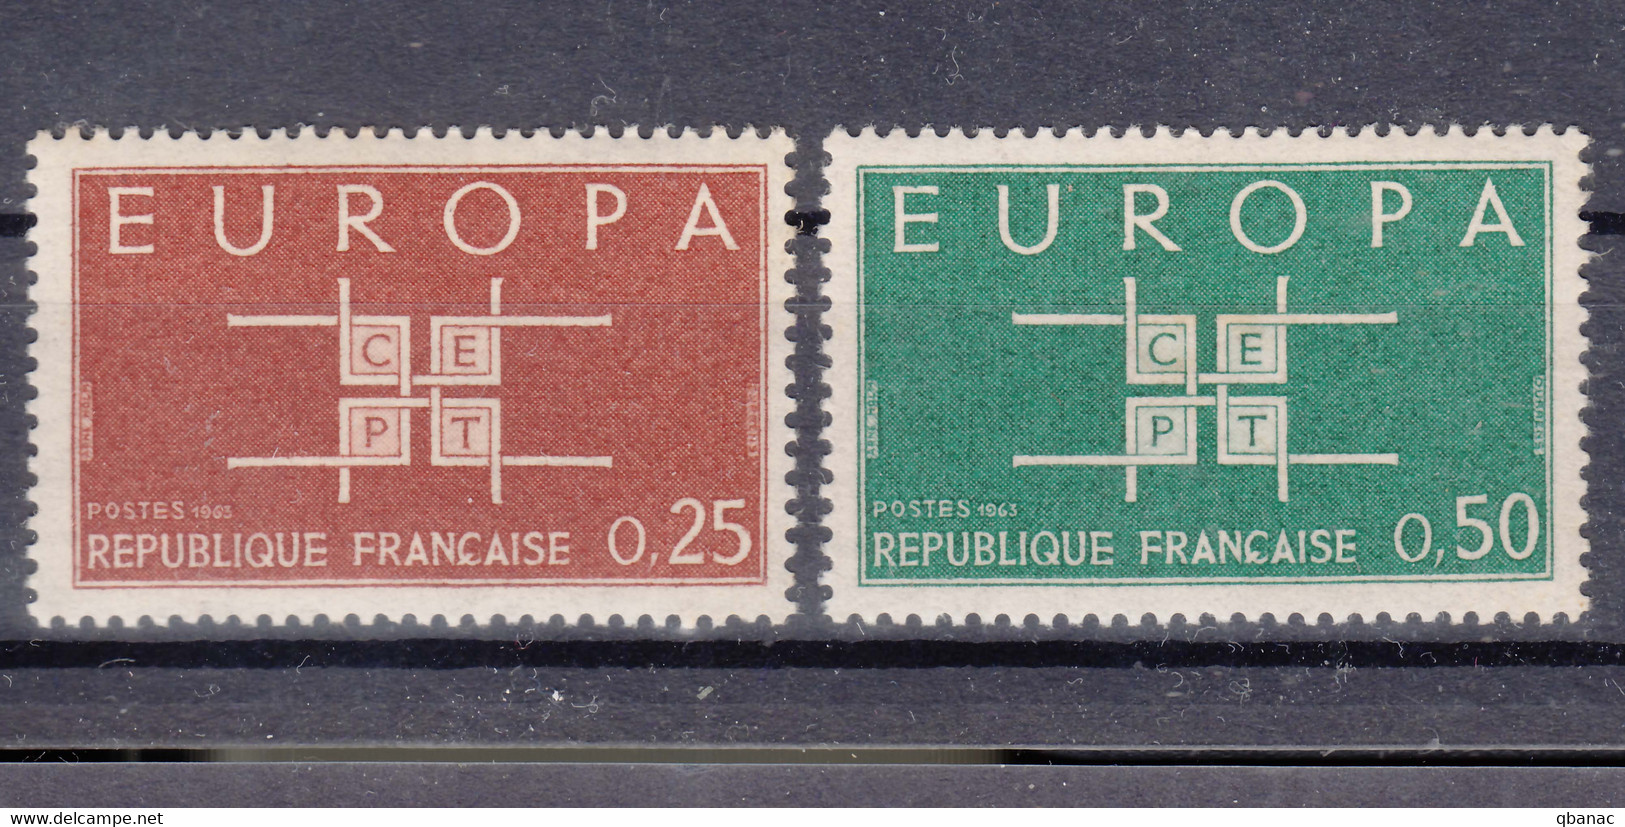 France 1963 Europa Mint Never Hinged - 1963